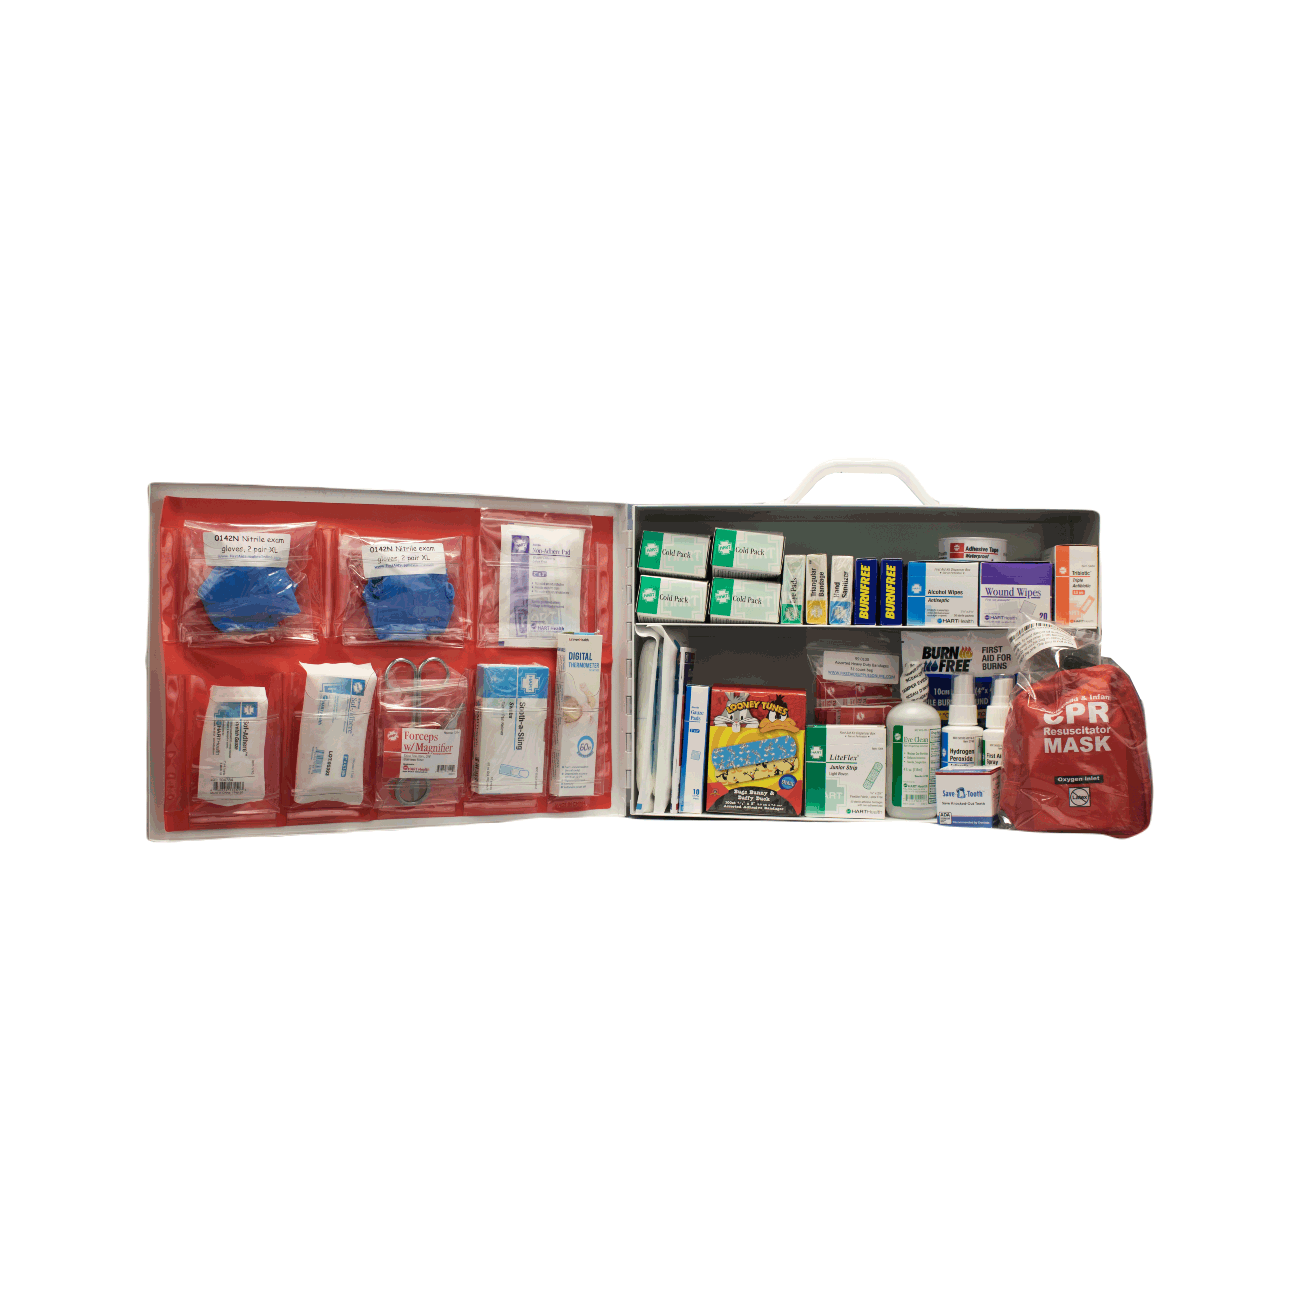 Day Care First Aid Kit for Children • First Aid Supplies Online